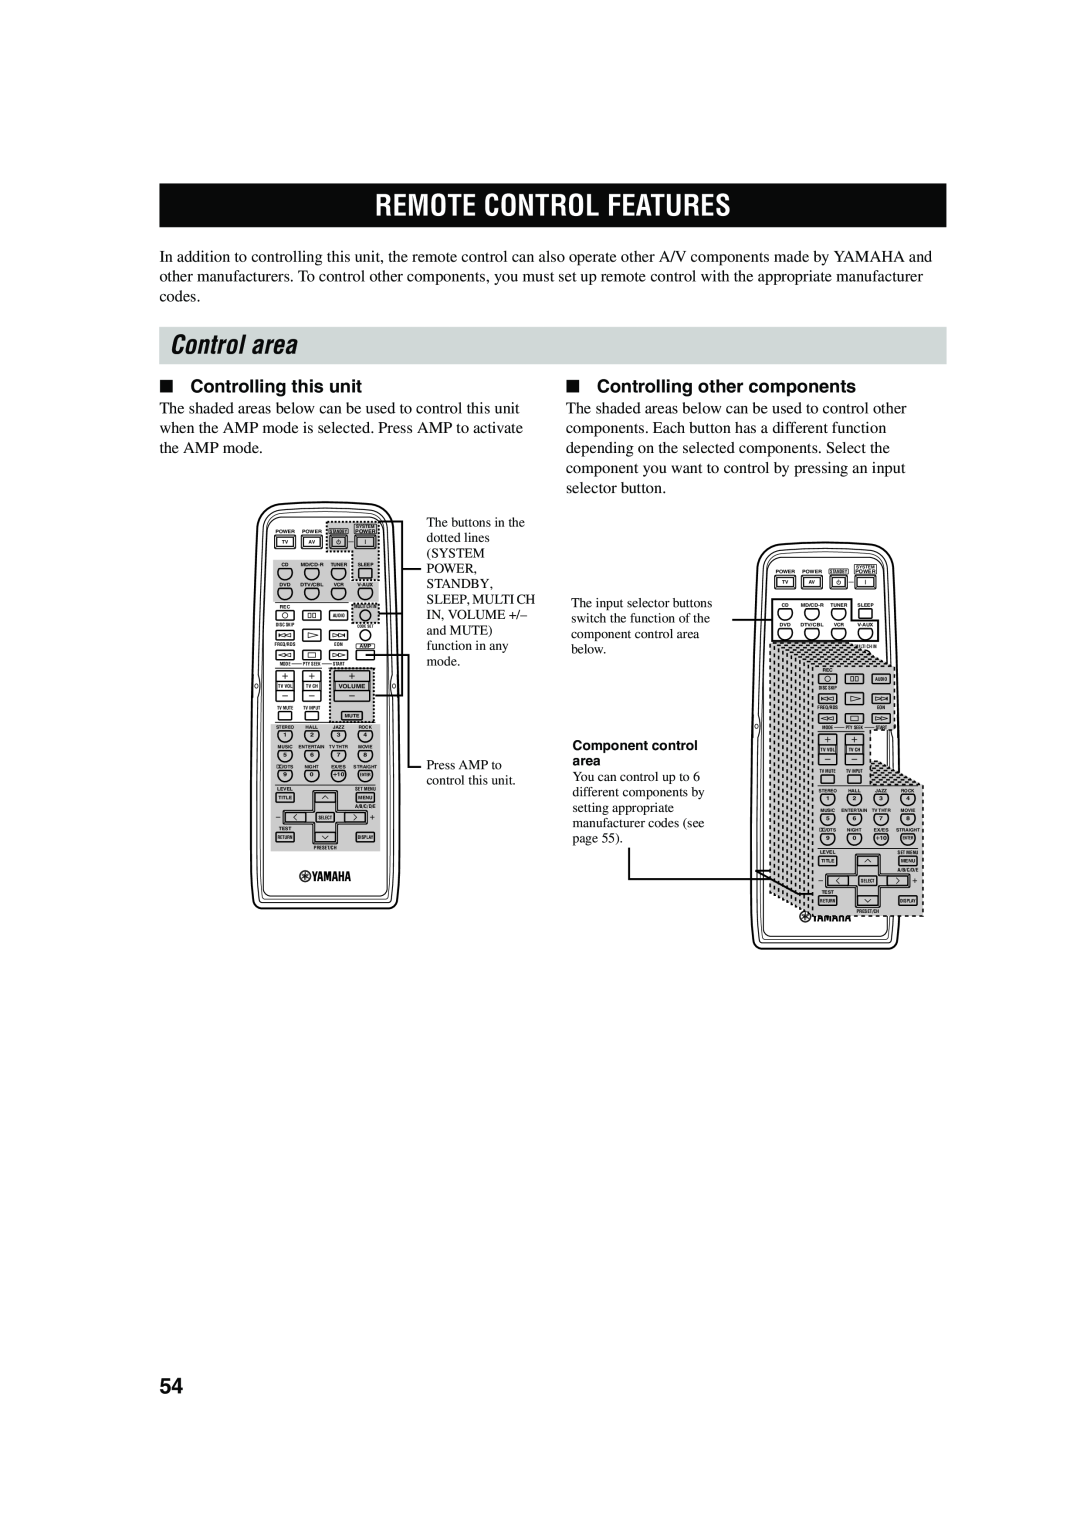 Yamaha RX-V450 owner manual Remote Control Features, Control area, Controlling this unit, Controlling other components 